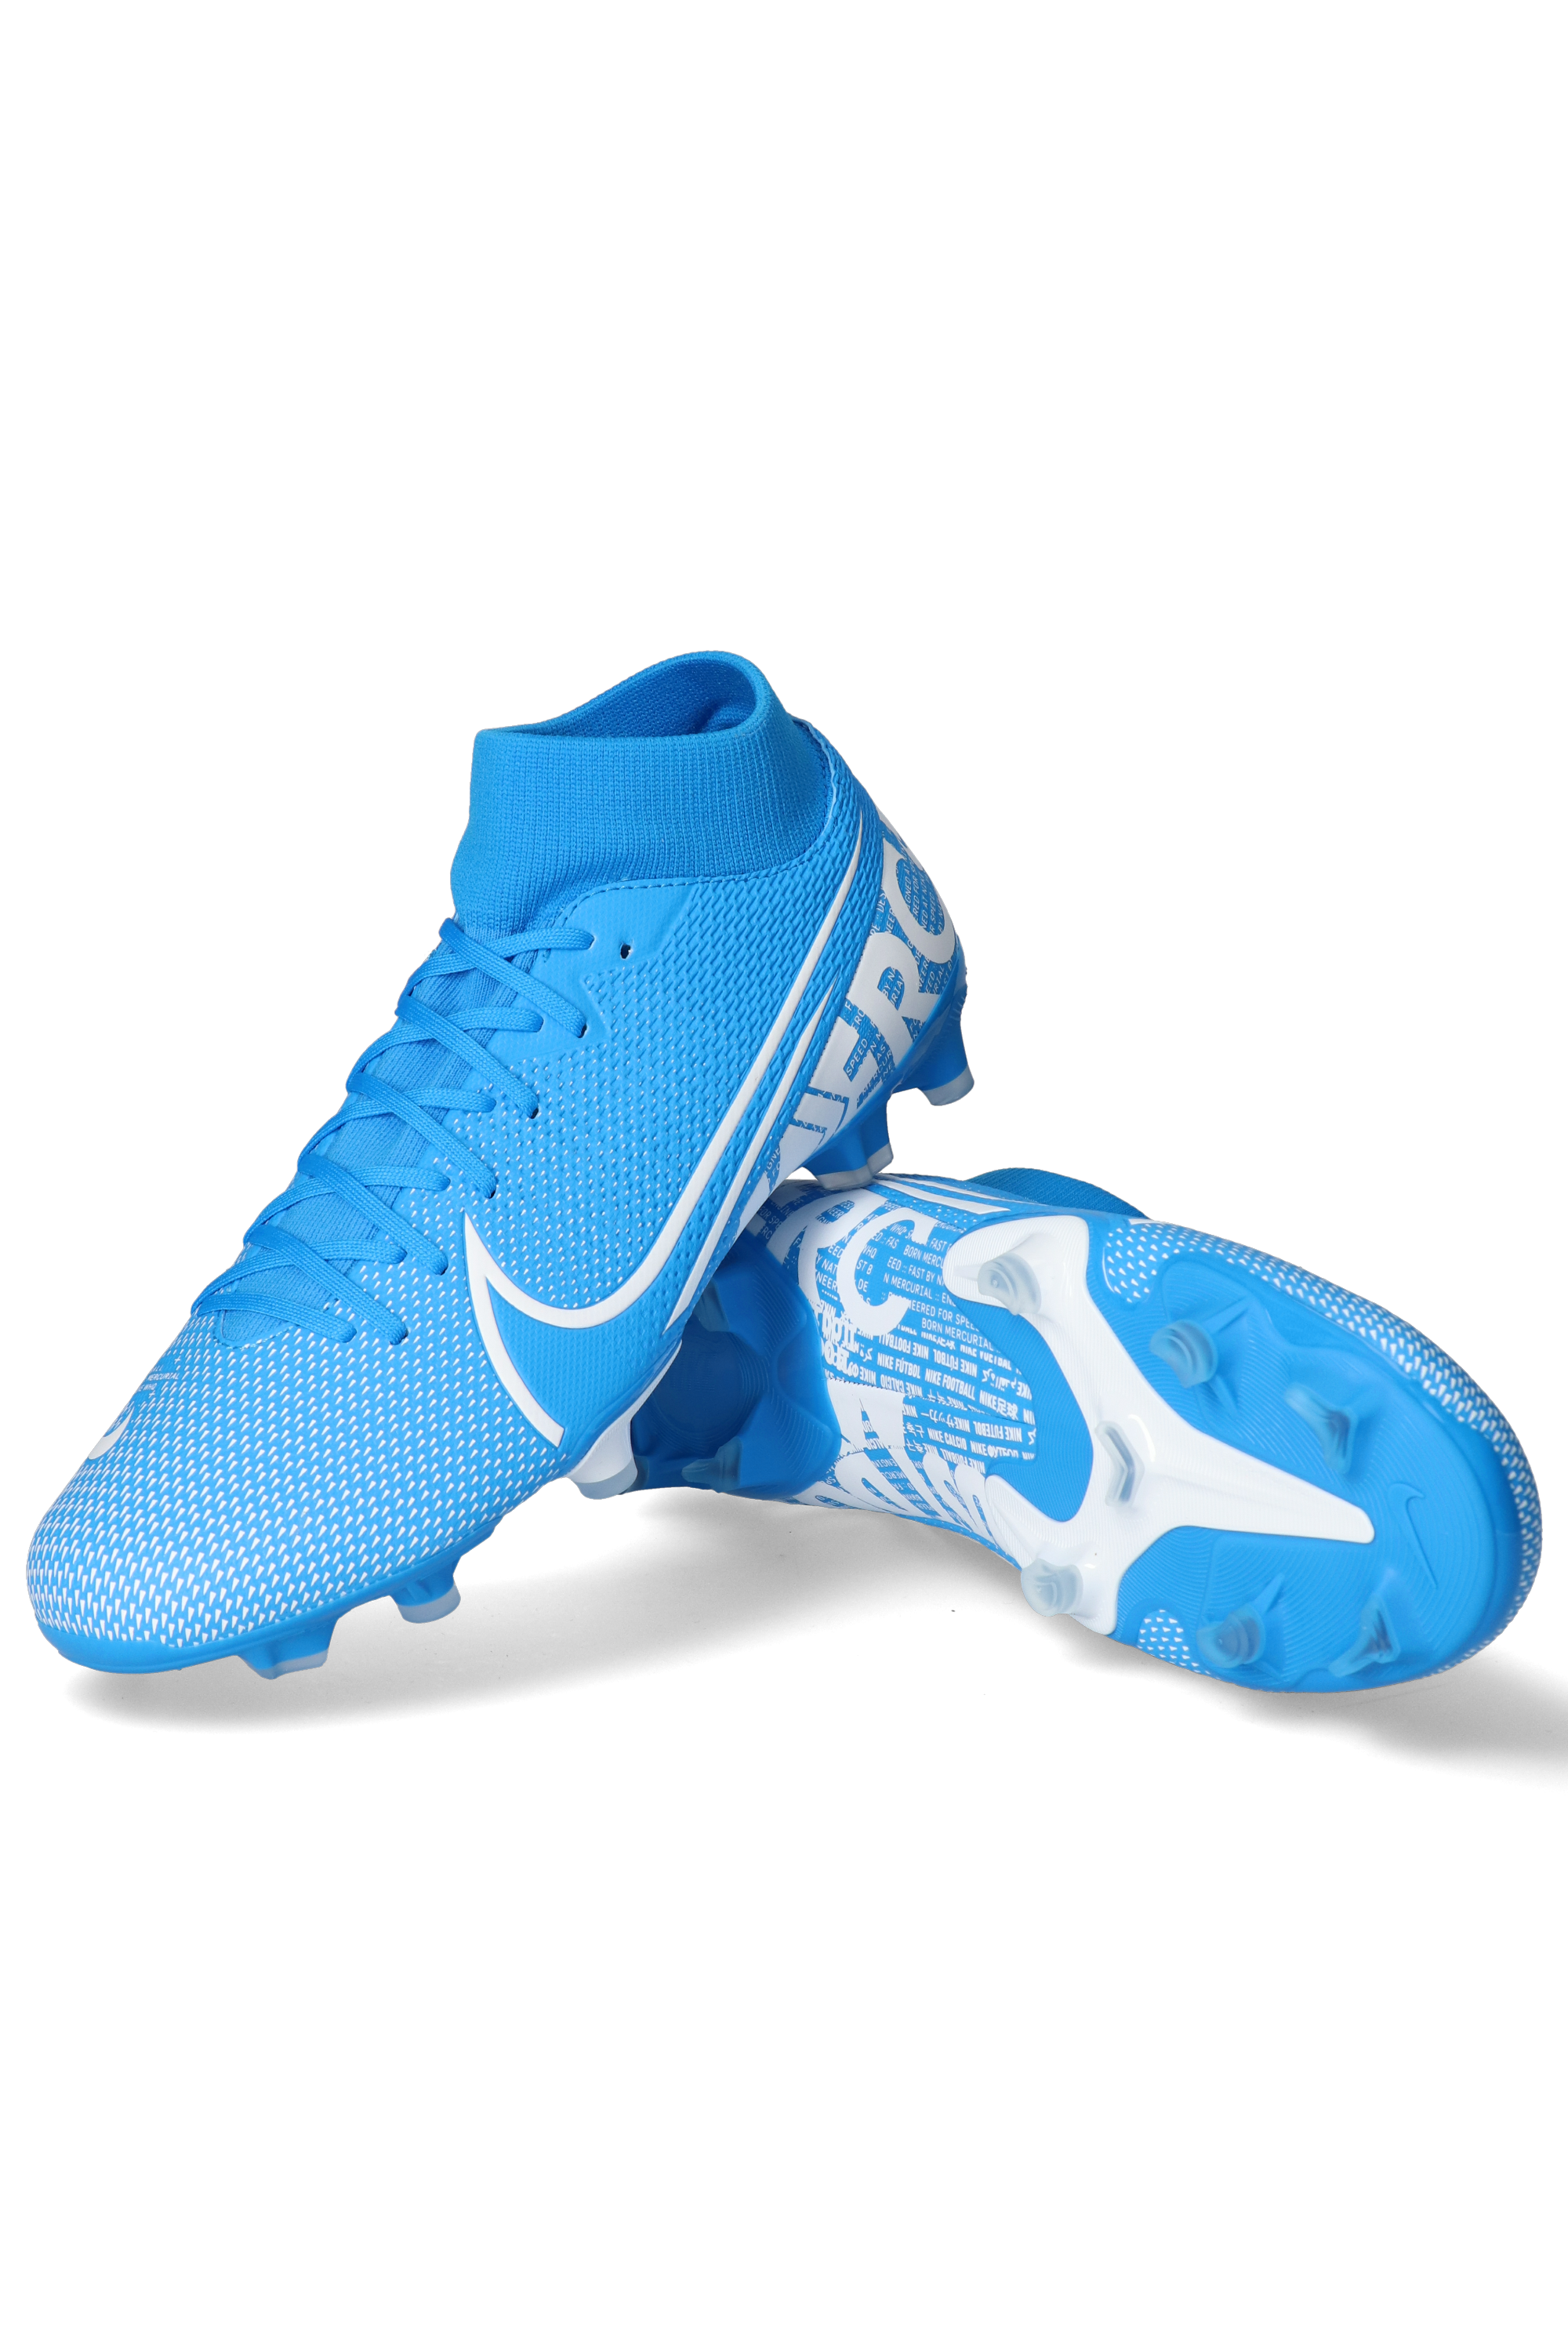 Nike Mercurial Superfly 6 Academy TF Infanti Netshoes Boots